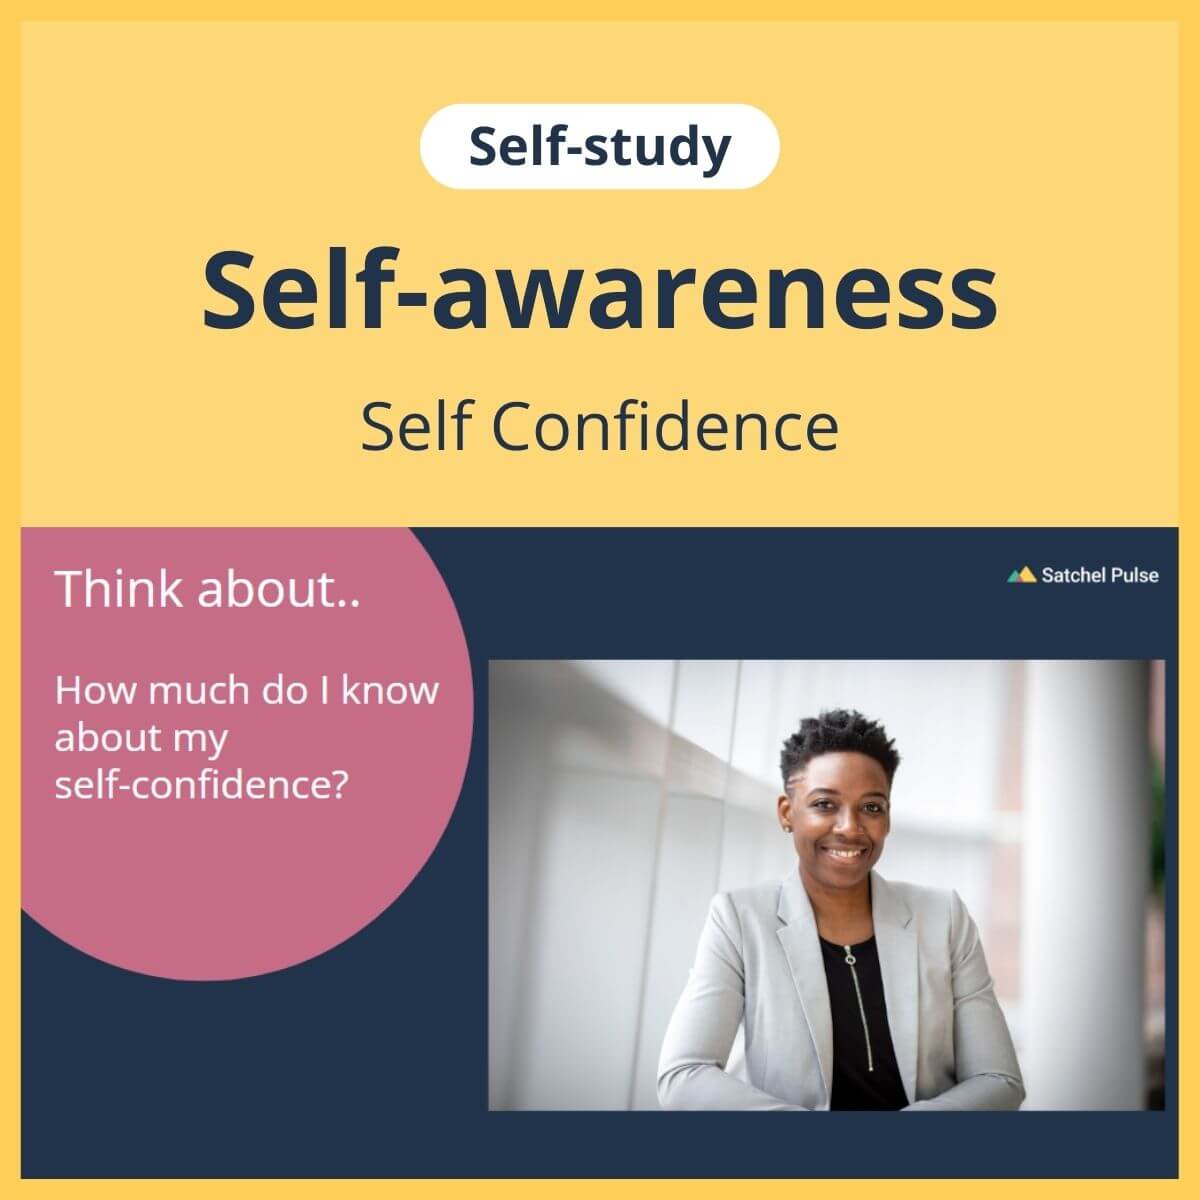 SEL self-study focusing on Self-Confidence to use in your classroom as one of your SEL activities for Self-Awareness